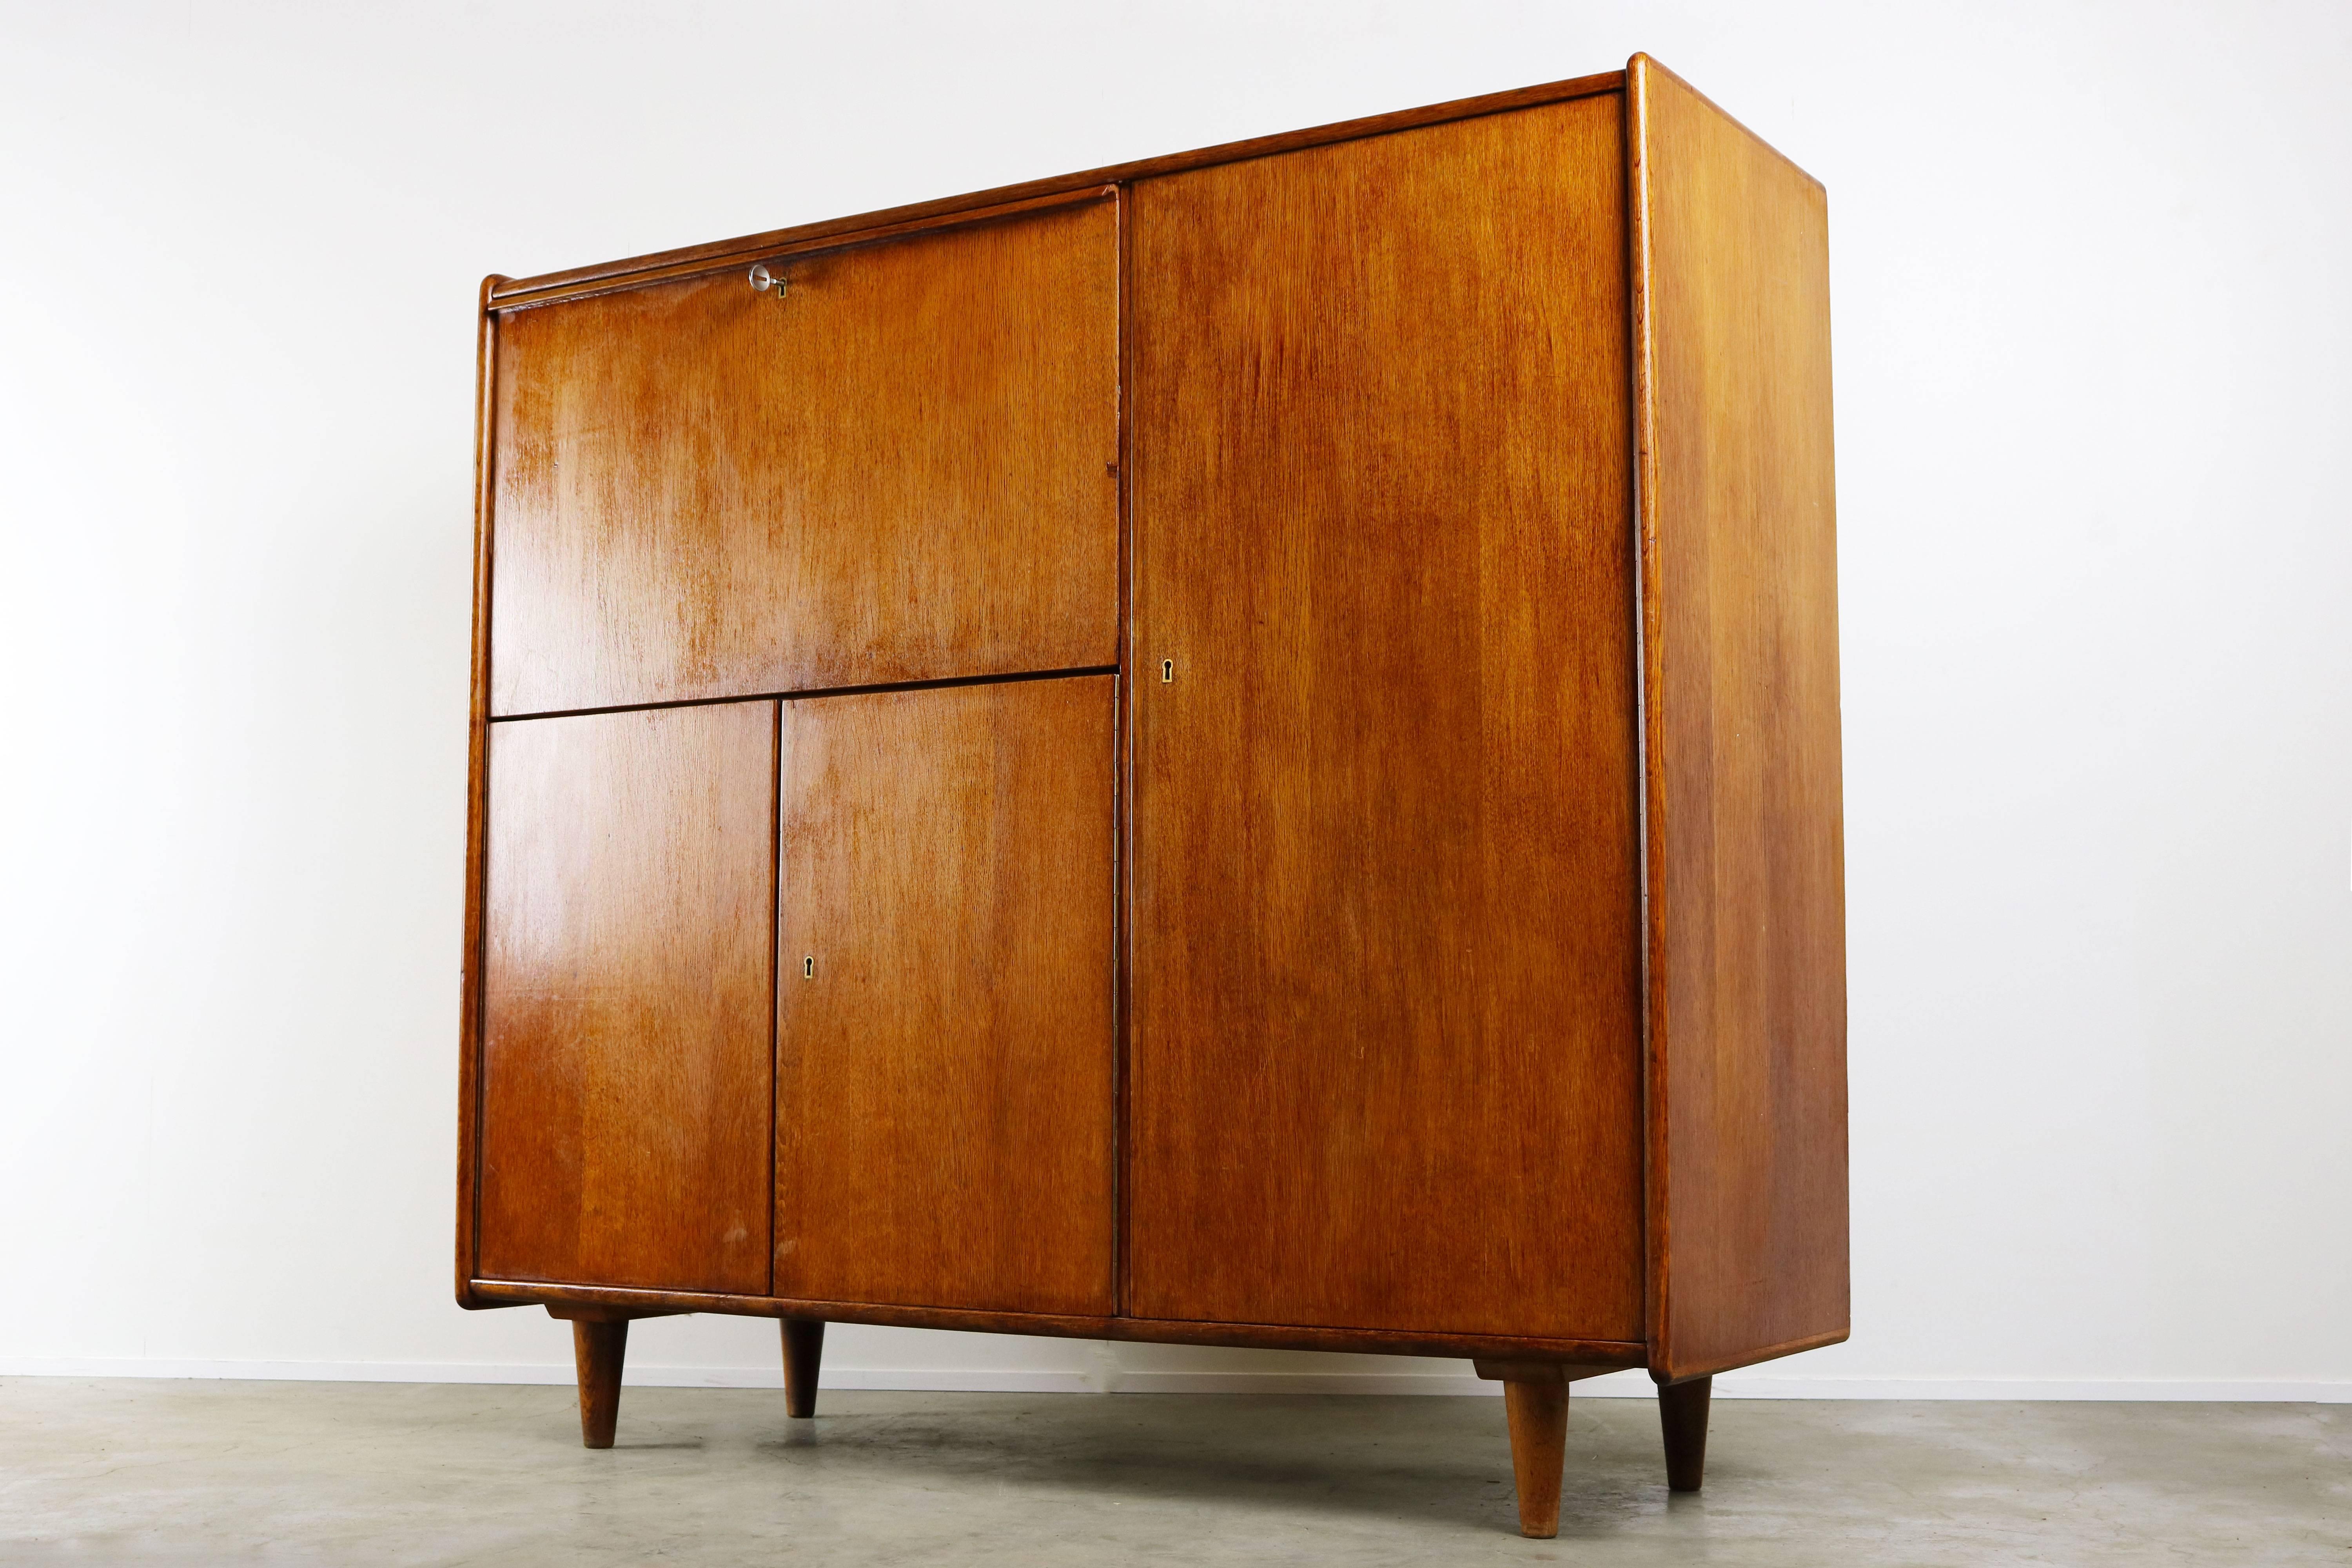 This secretaire from the Oak series was designed by Cees Braakman for UMS Pastoe in the 1940. This is the first production of cees braakman's secretaire design. Later this model changed to well known Birch series and Japanese series secretaire. It